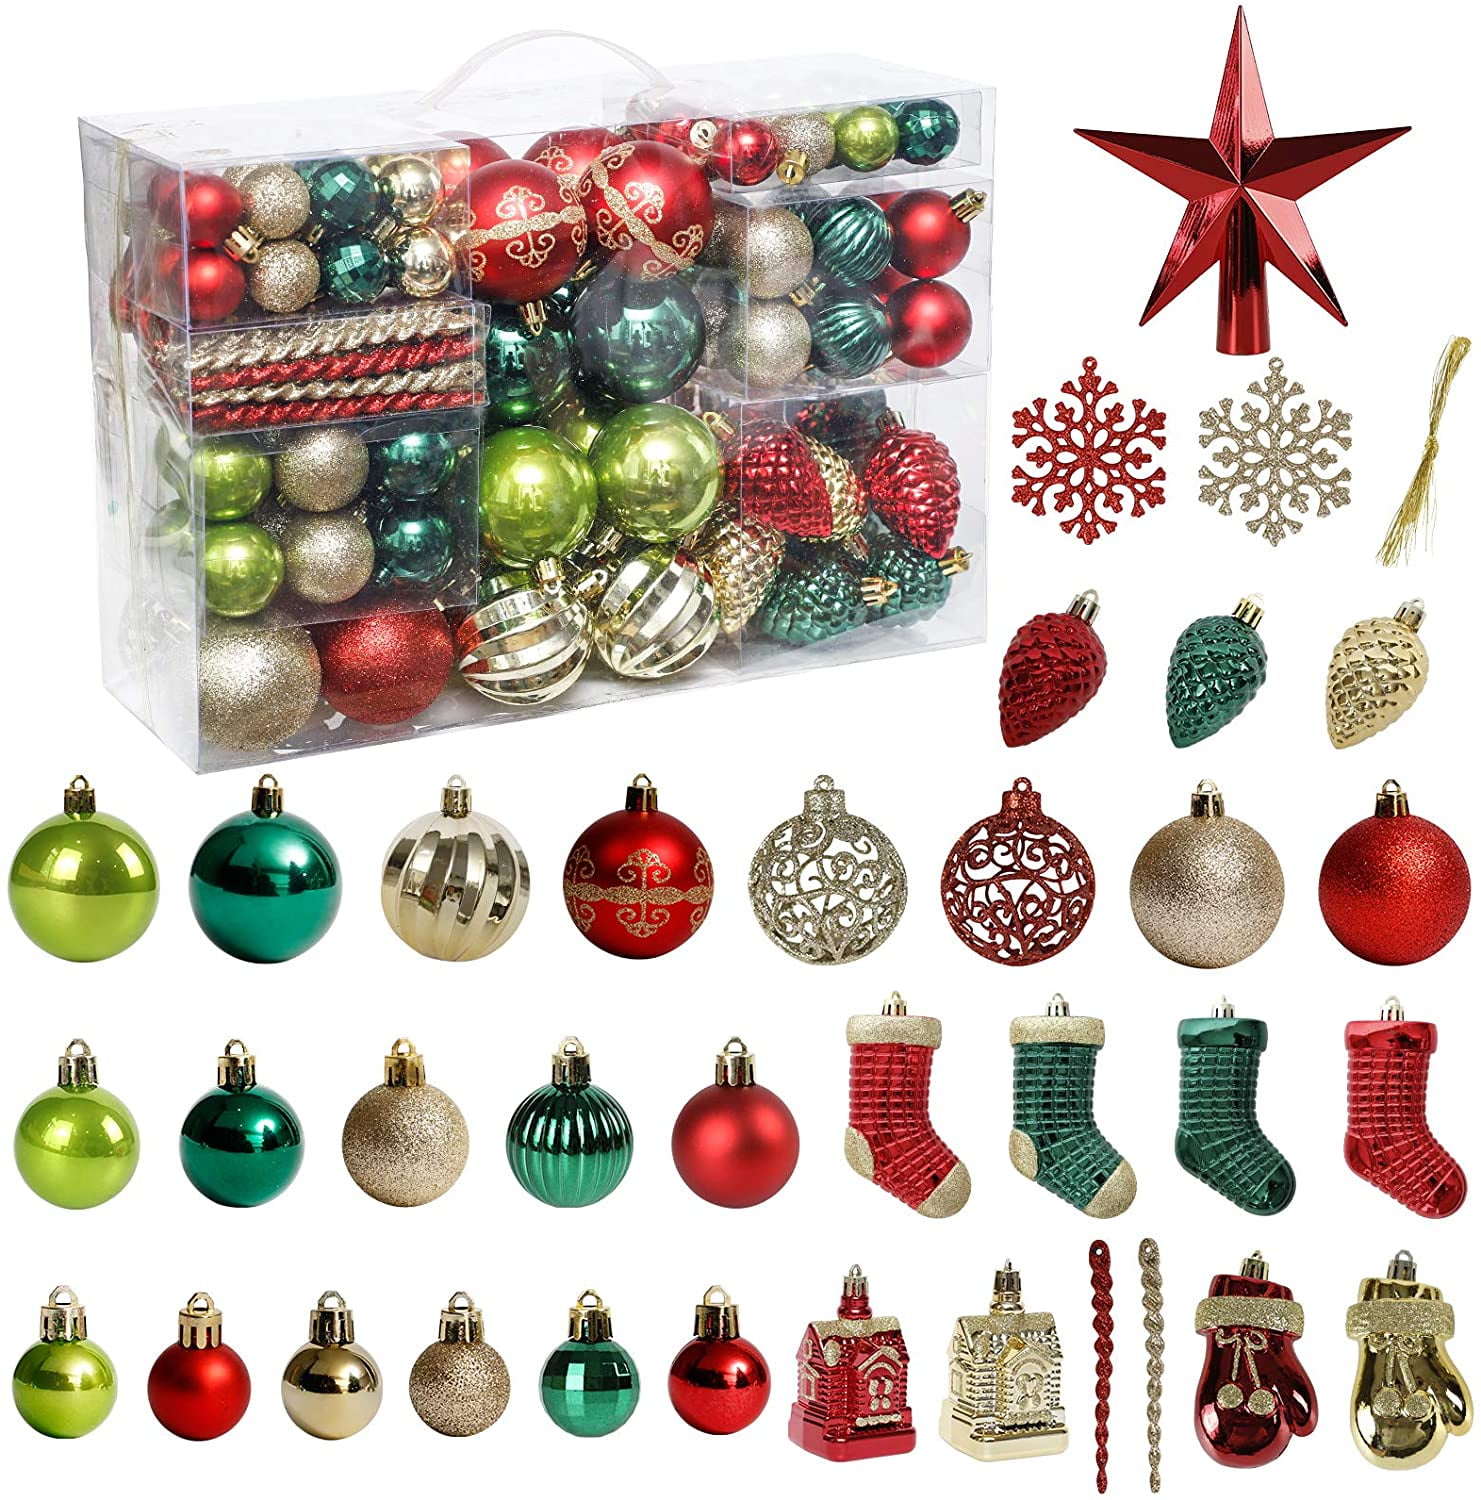 Combo of 8 Ball and Shaped Styles Prextex Red Christmas Ball Ornaments for Christmas Decorations 24 Pieces Xmas Tree Shatterproof Ornaments with Hanging Loop for Holiday and Party Decoration